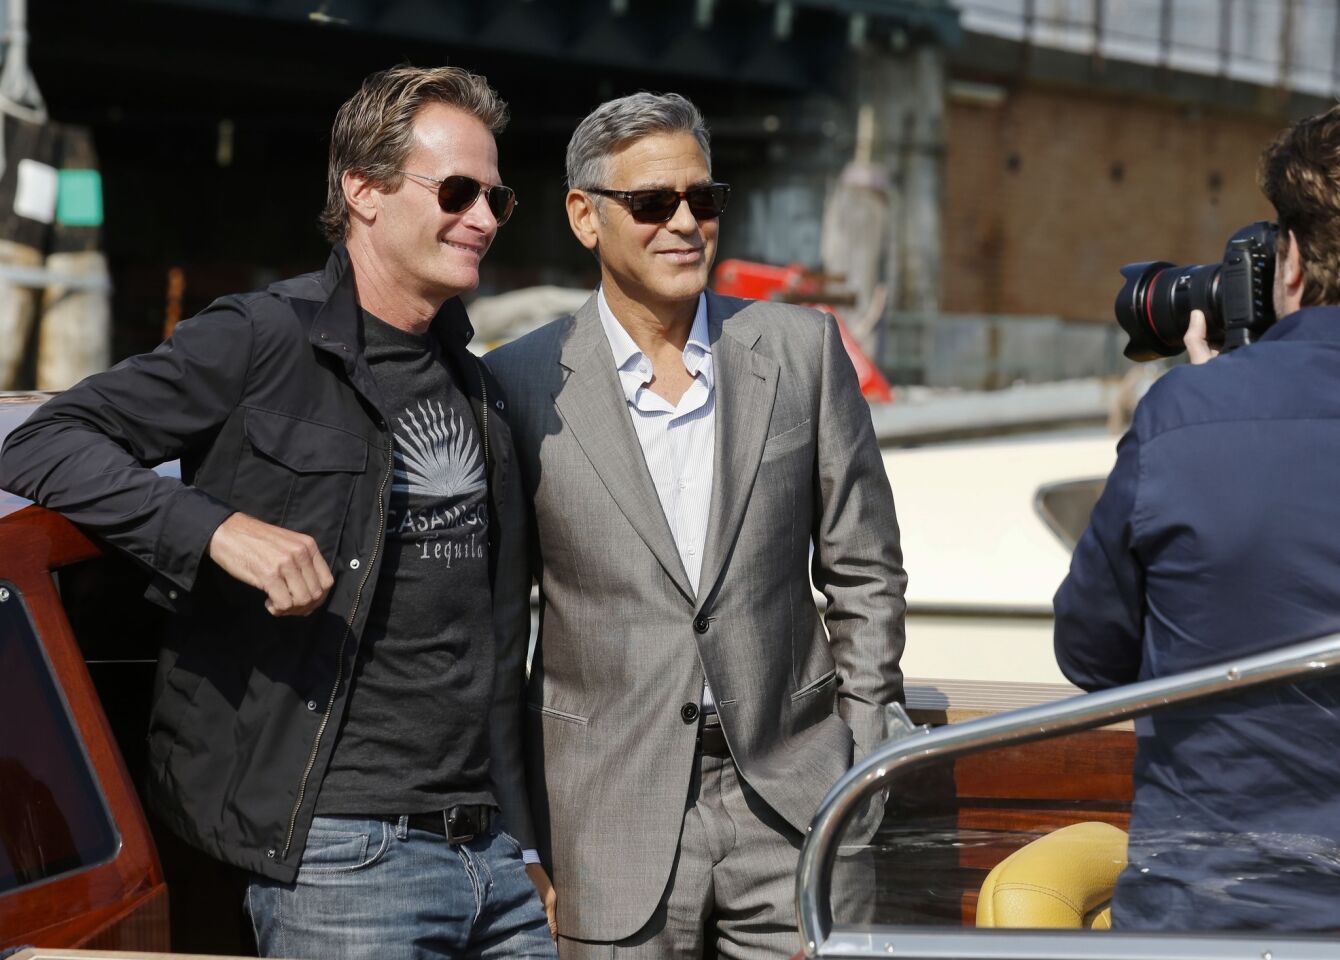 Rande Gerber, left, with friend and business partner George Clooney in Venice.